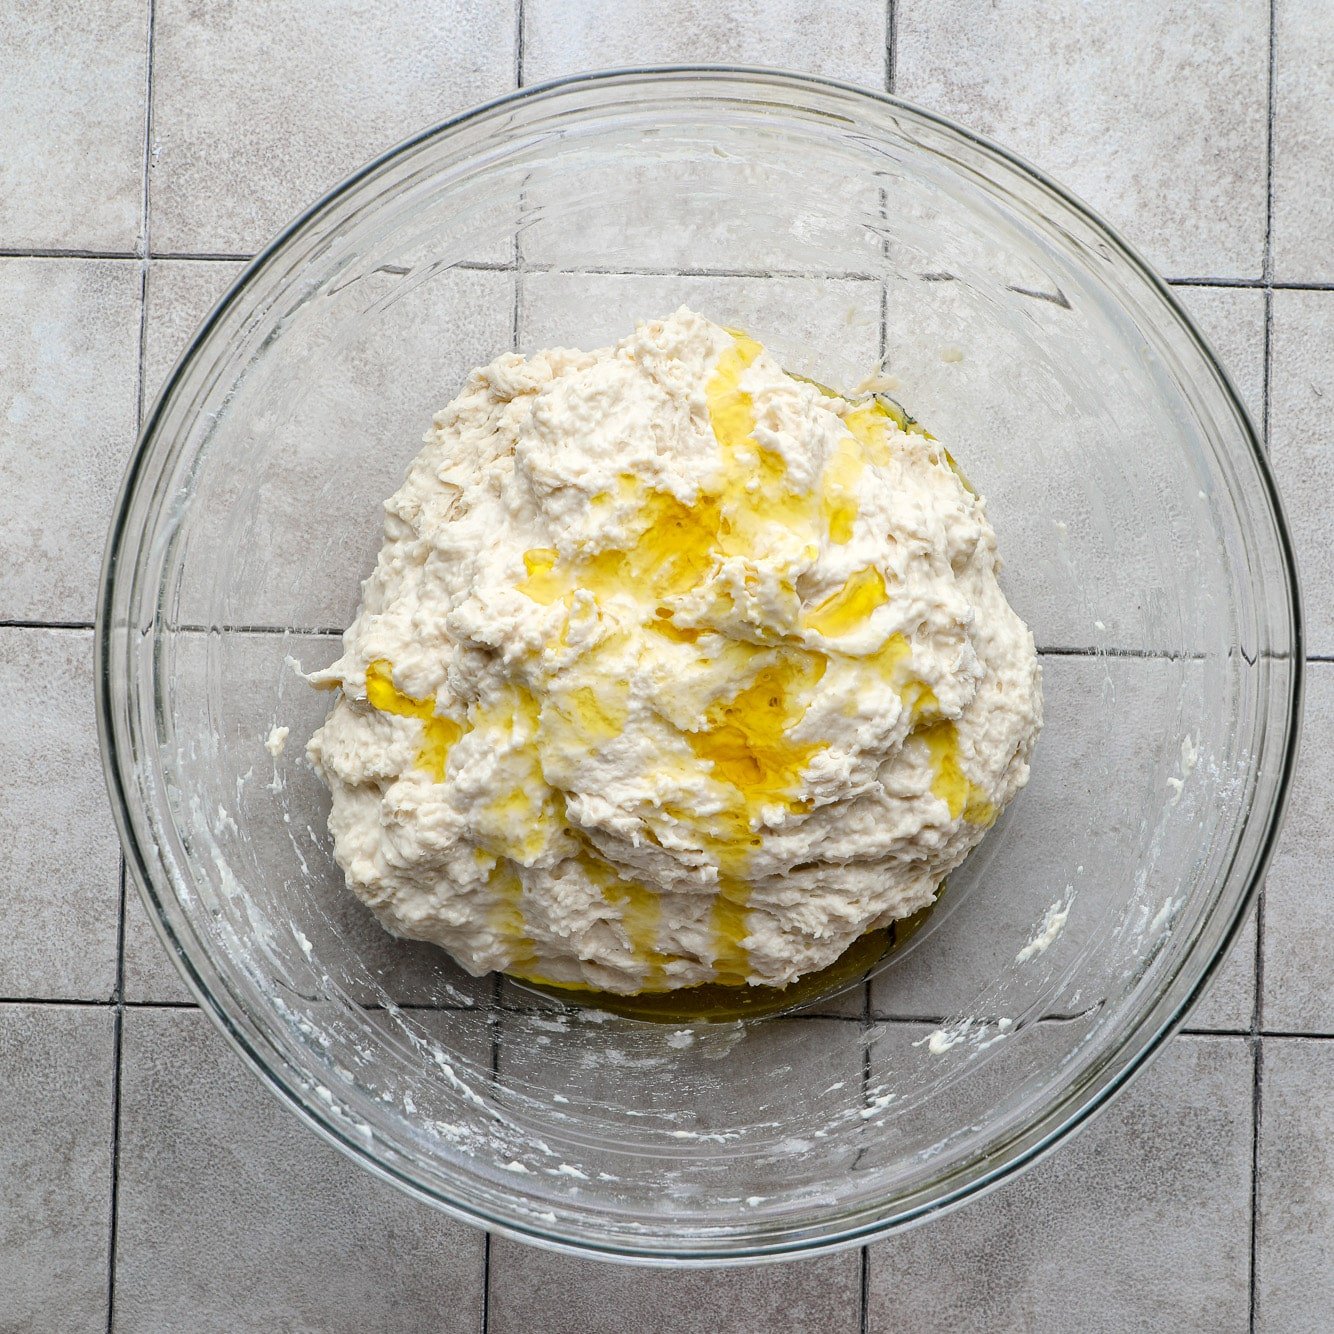 a ball of focaccia dough with oil on top in a glass bowl.